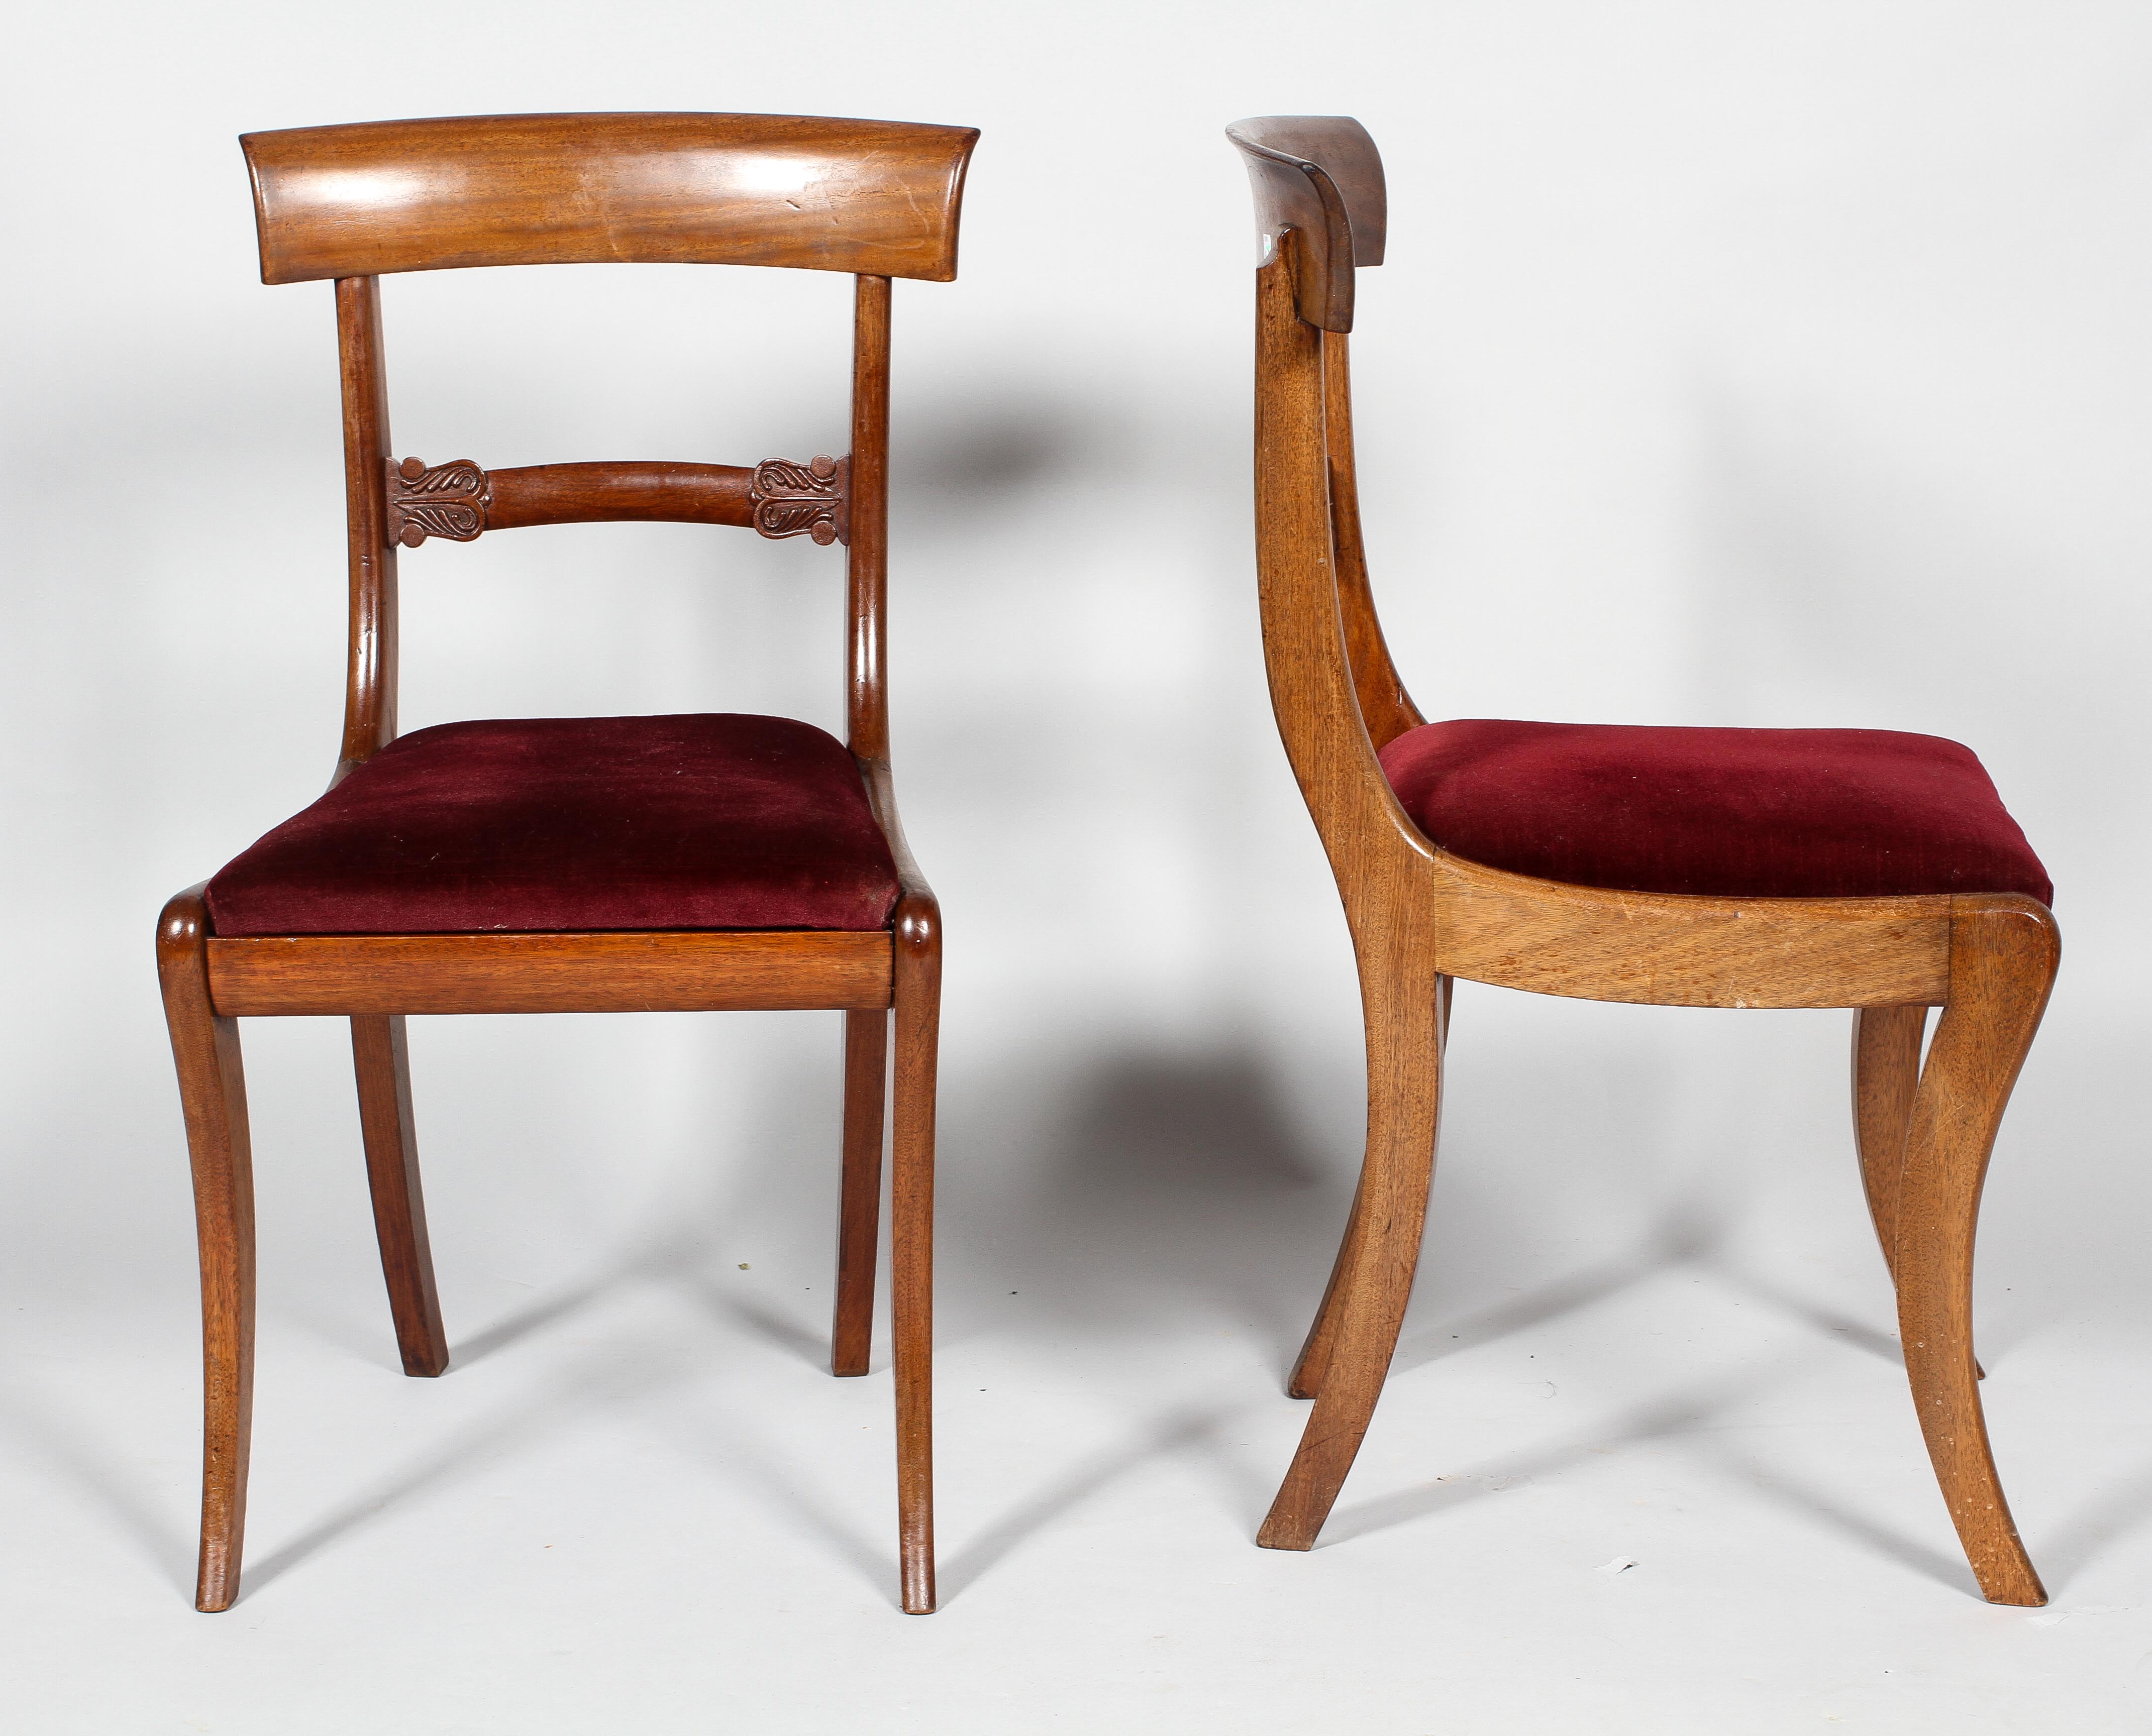 A pair of William IV mahogany dining chairs, with carved 'Trafalgar' top rail, - Image 2 of 2